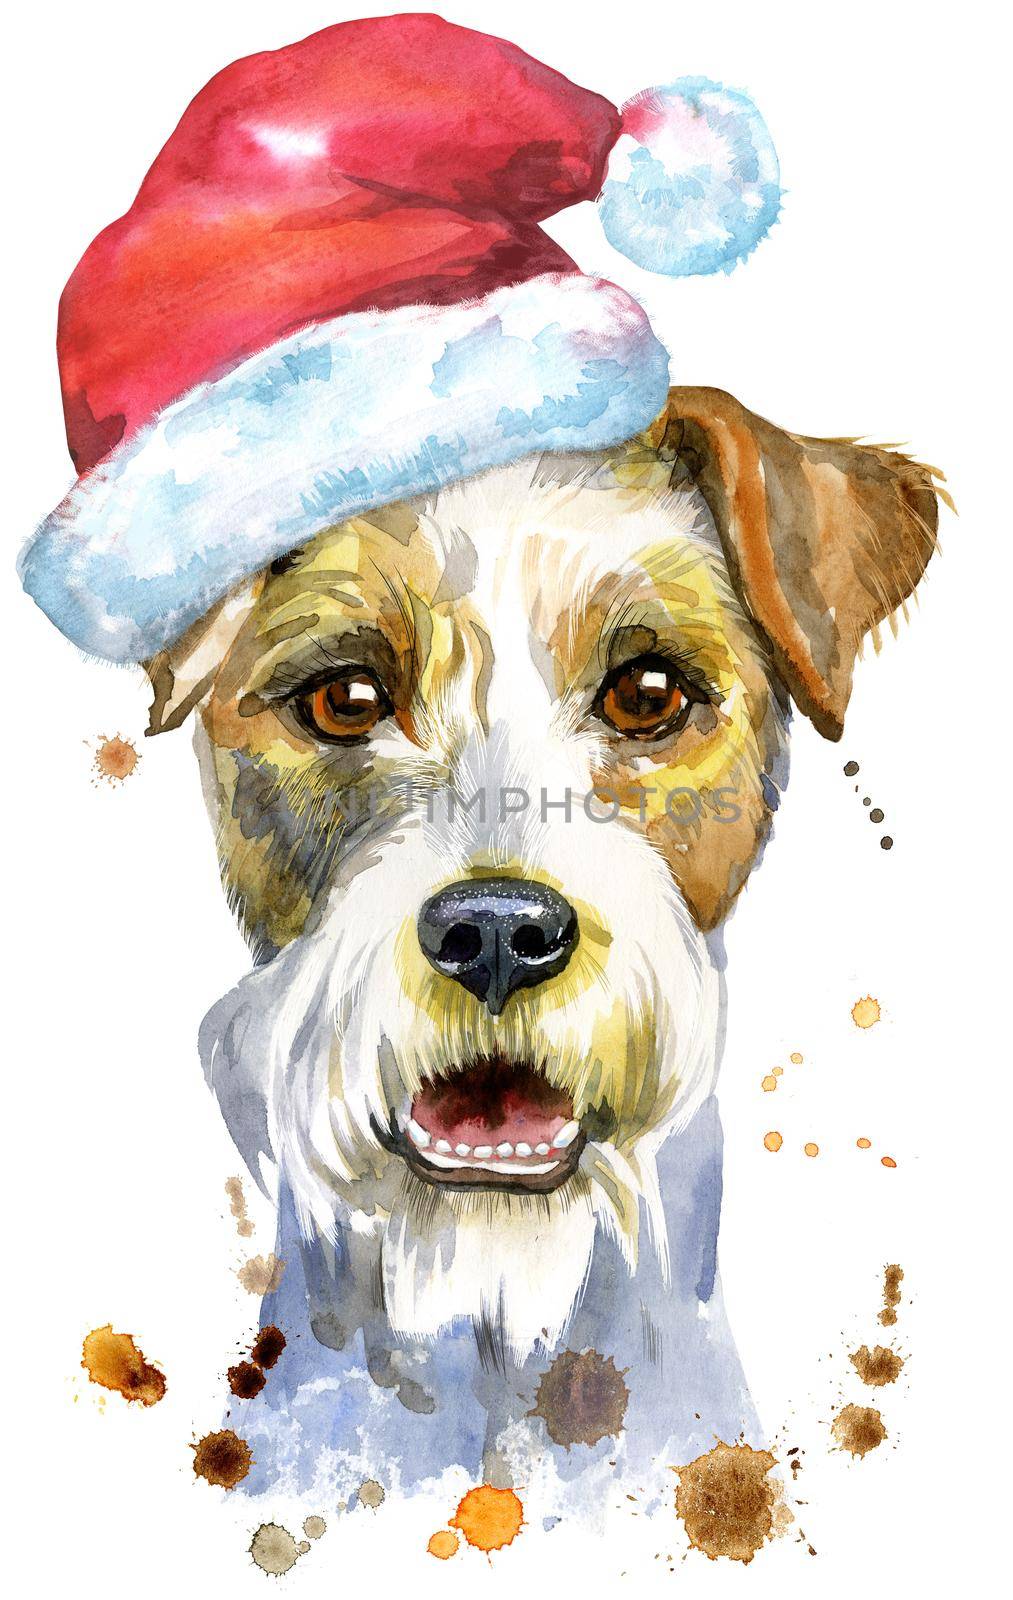 Cute Dog. Dog T-shirt graphics. watercolor airedale terrier illustration with Santa hat